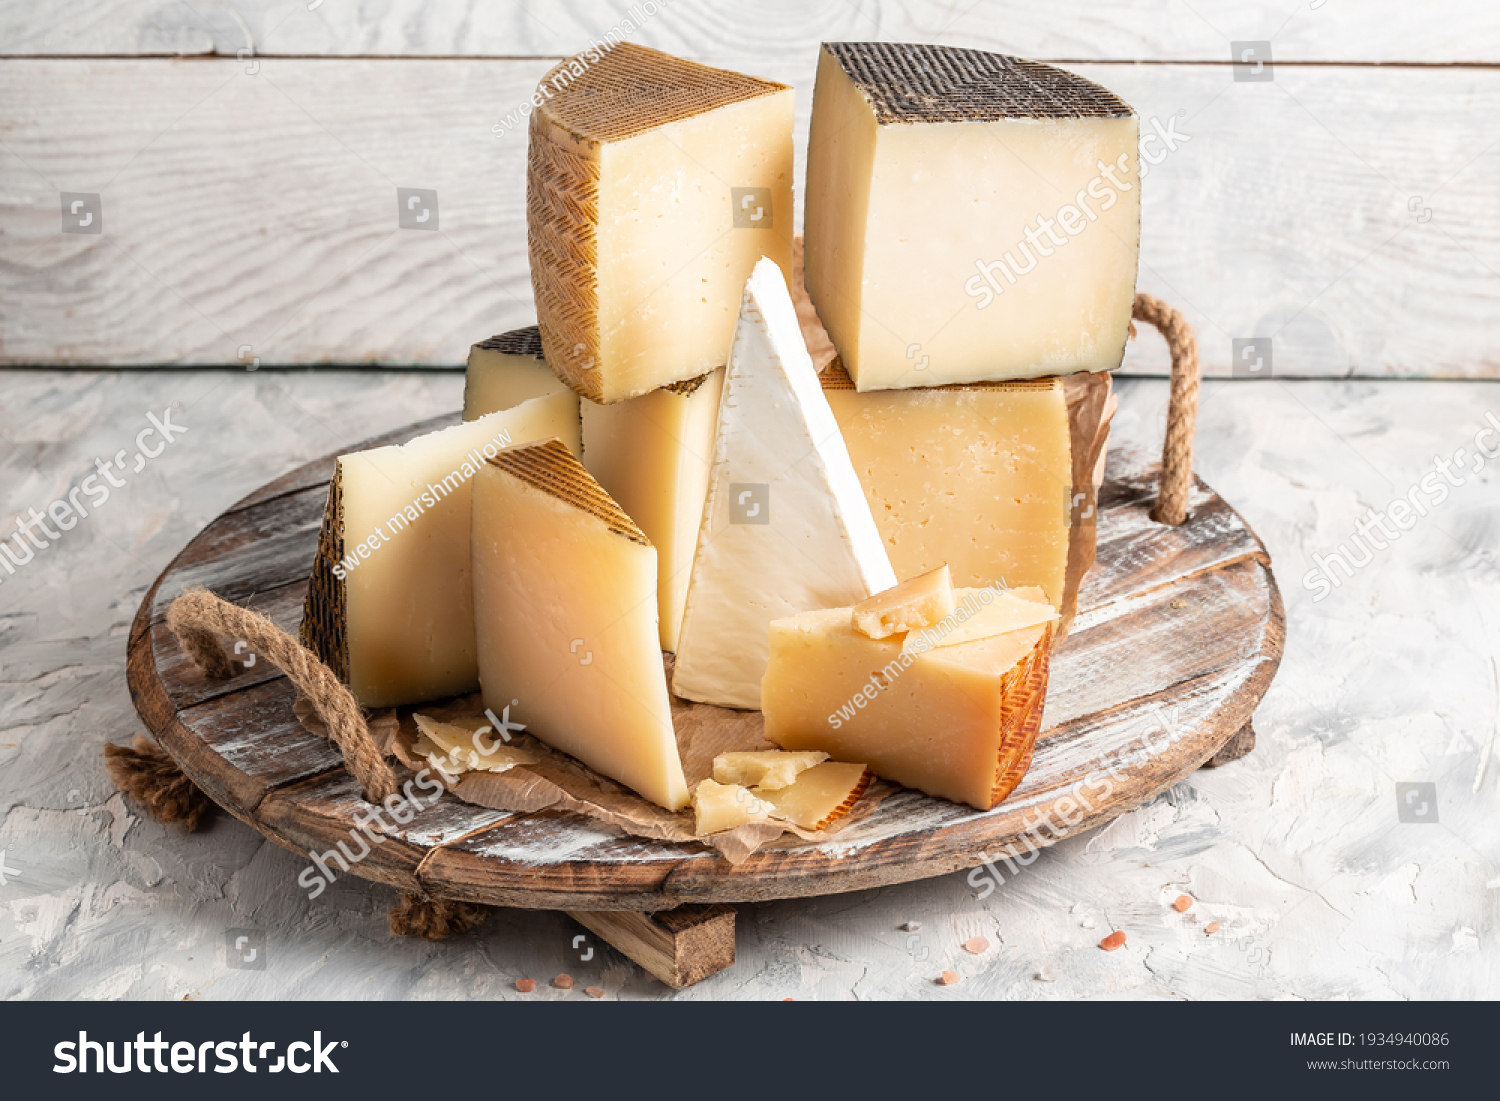 Petit Basque, French cheese, Cheese board of various types of soft and hard cheese. spanish manchego cheese. #1934940086